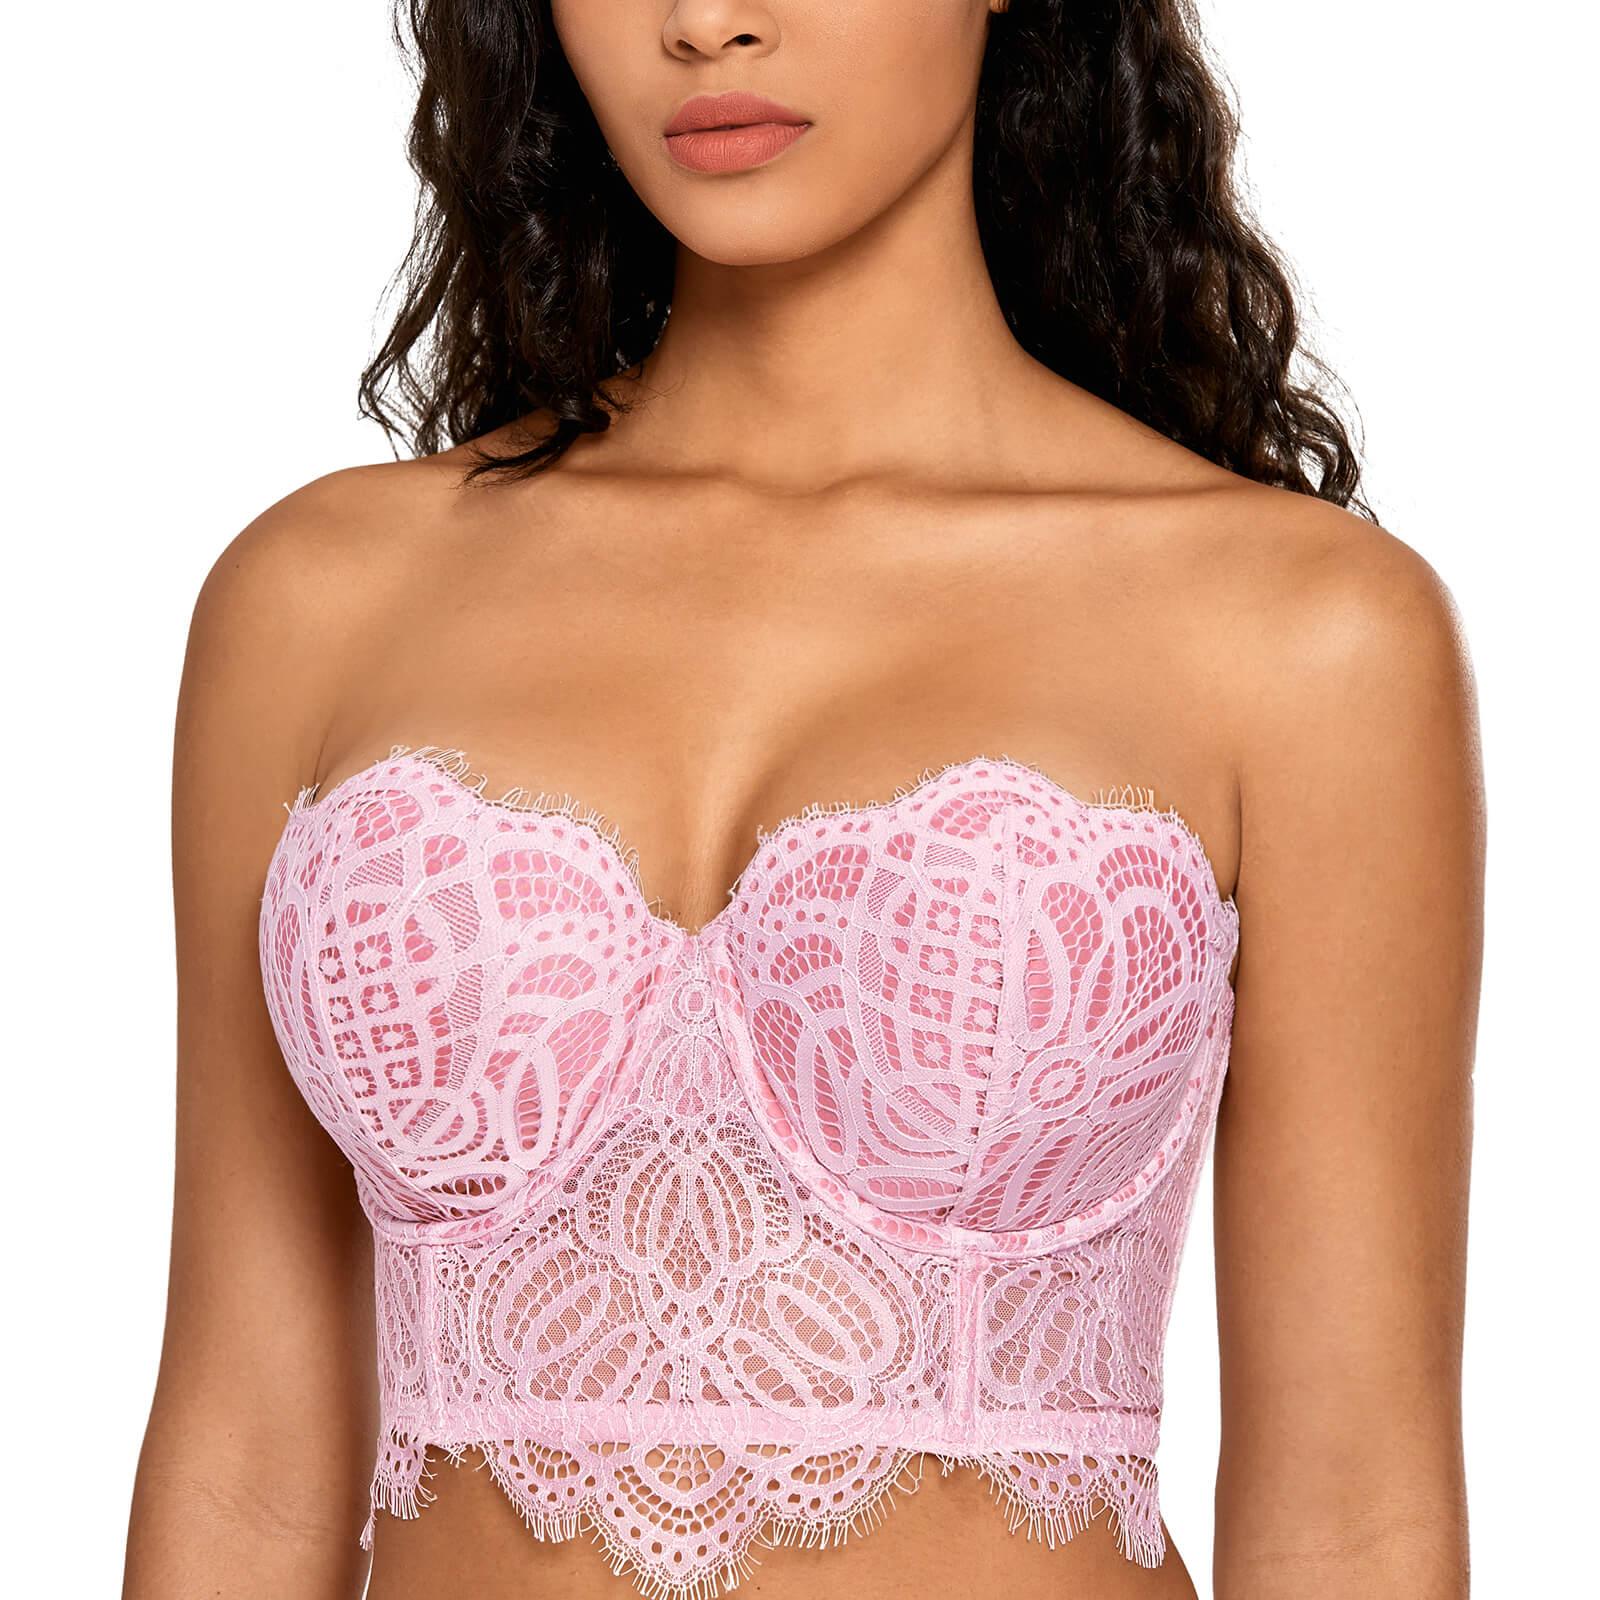 Buy Padded Underwired Multiway Strapless Bra in Pink - Lace Online India,  Best Prices, COD - Clovia - BR1369R22